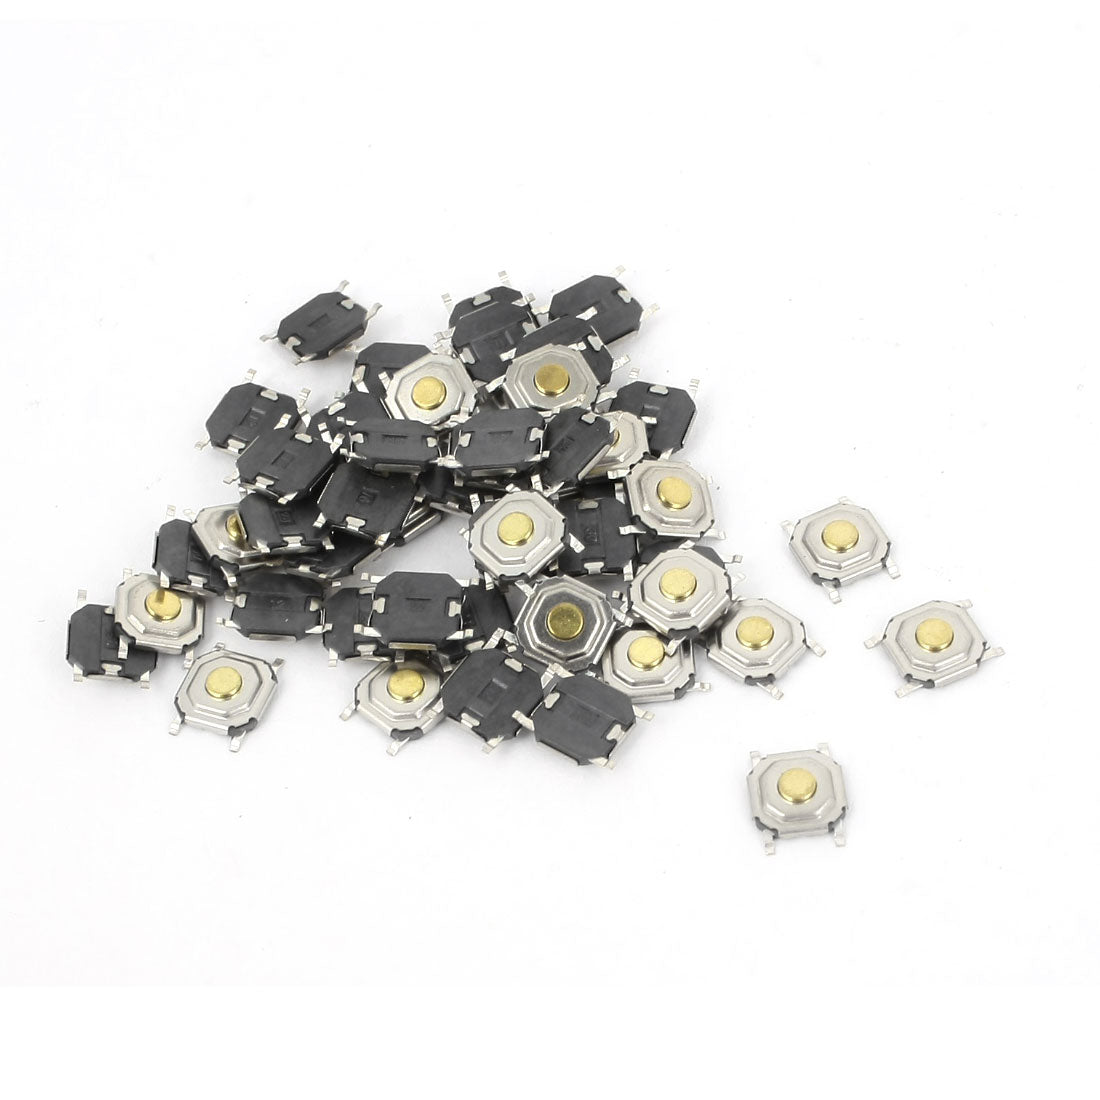 uxcell Uxcell 100 Pcs 5mmx5mmx1.5mm 4Pin Surface Mounted Devices Momentary Push Button Tact Tactile Micro Switches